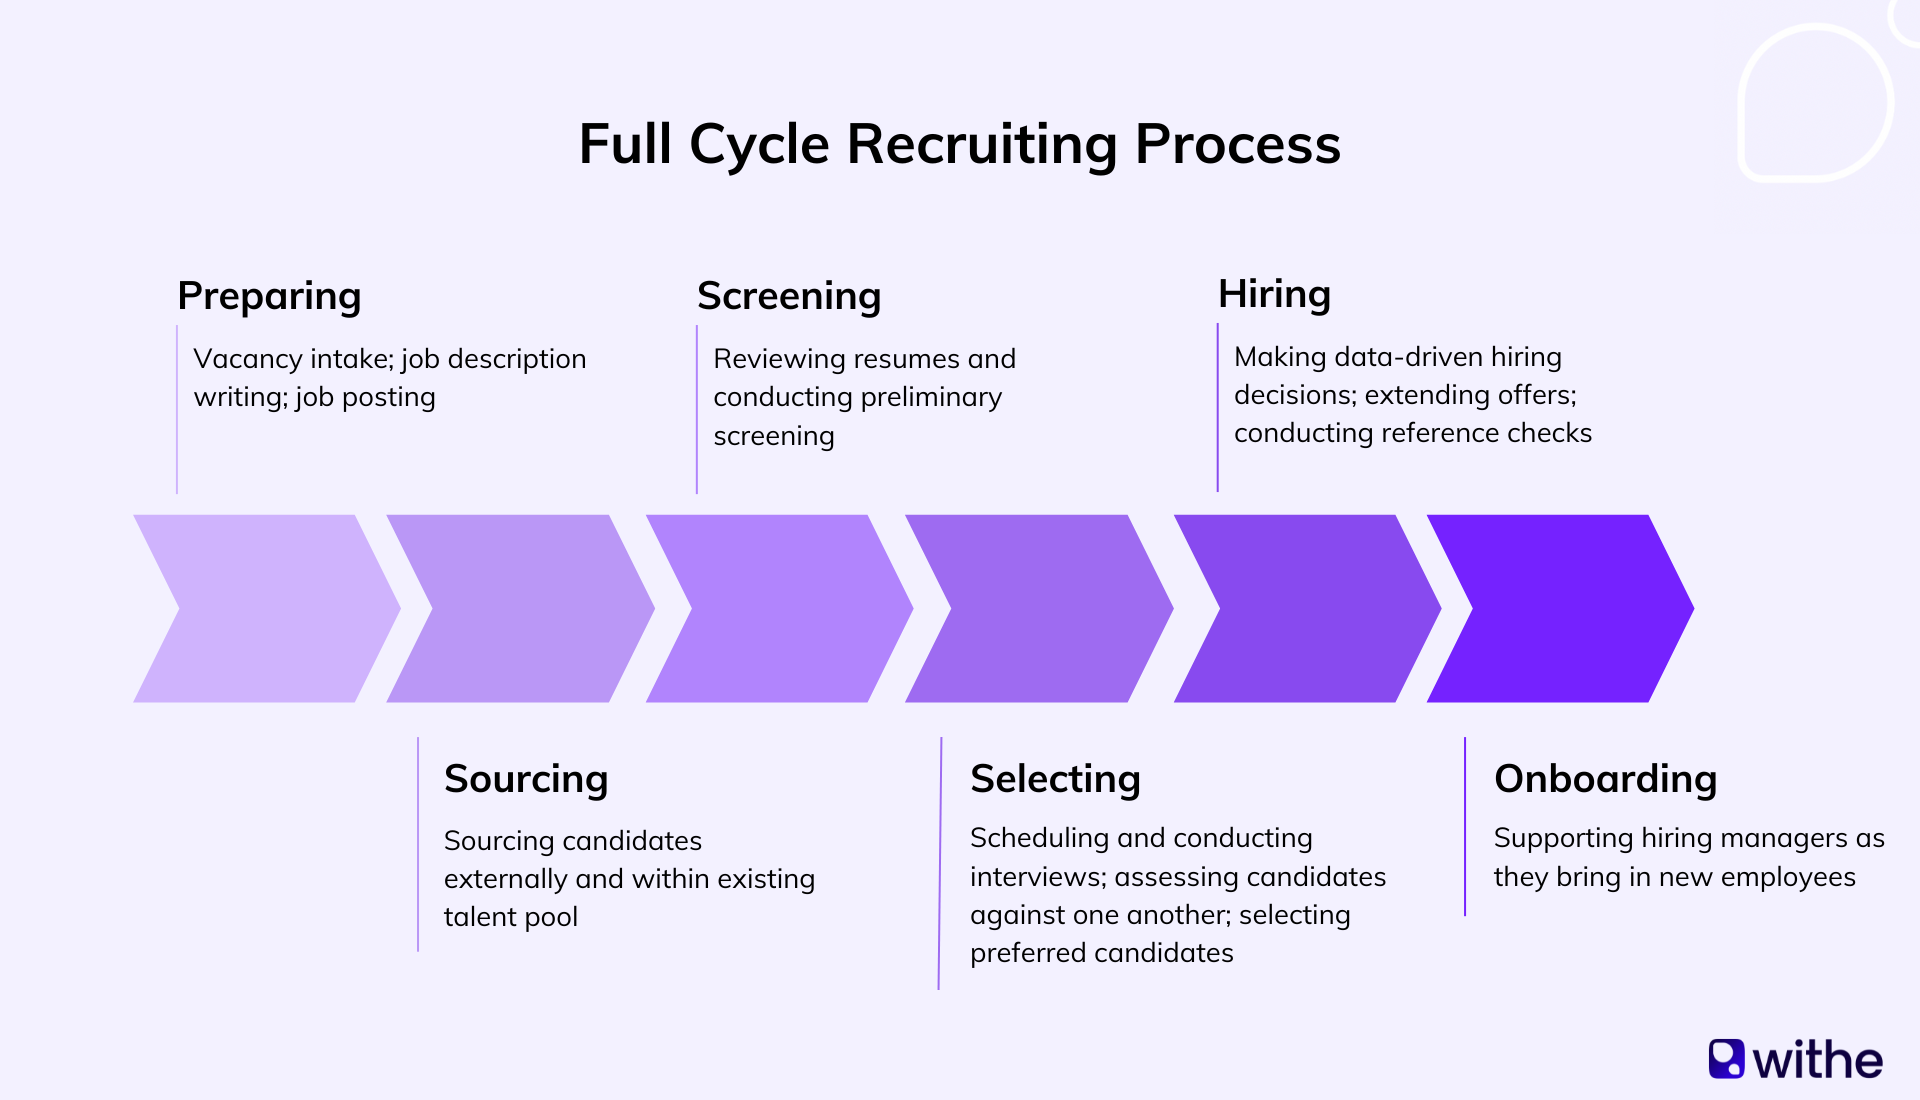 6 steps of the full cycle recruiting process